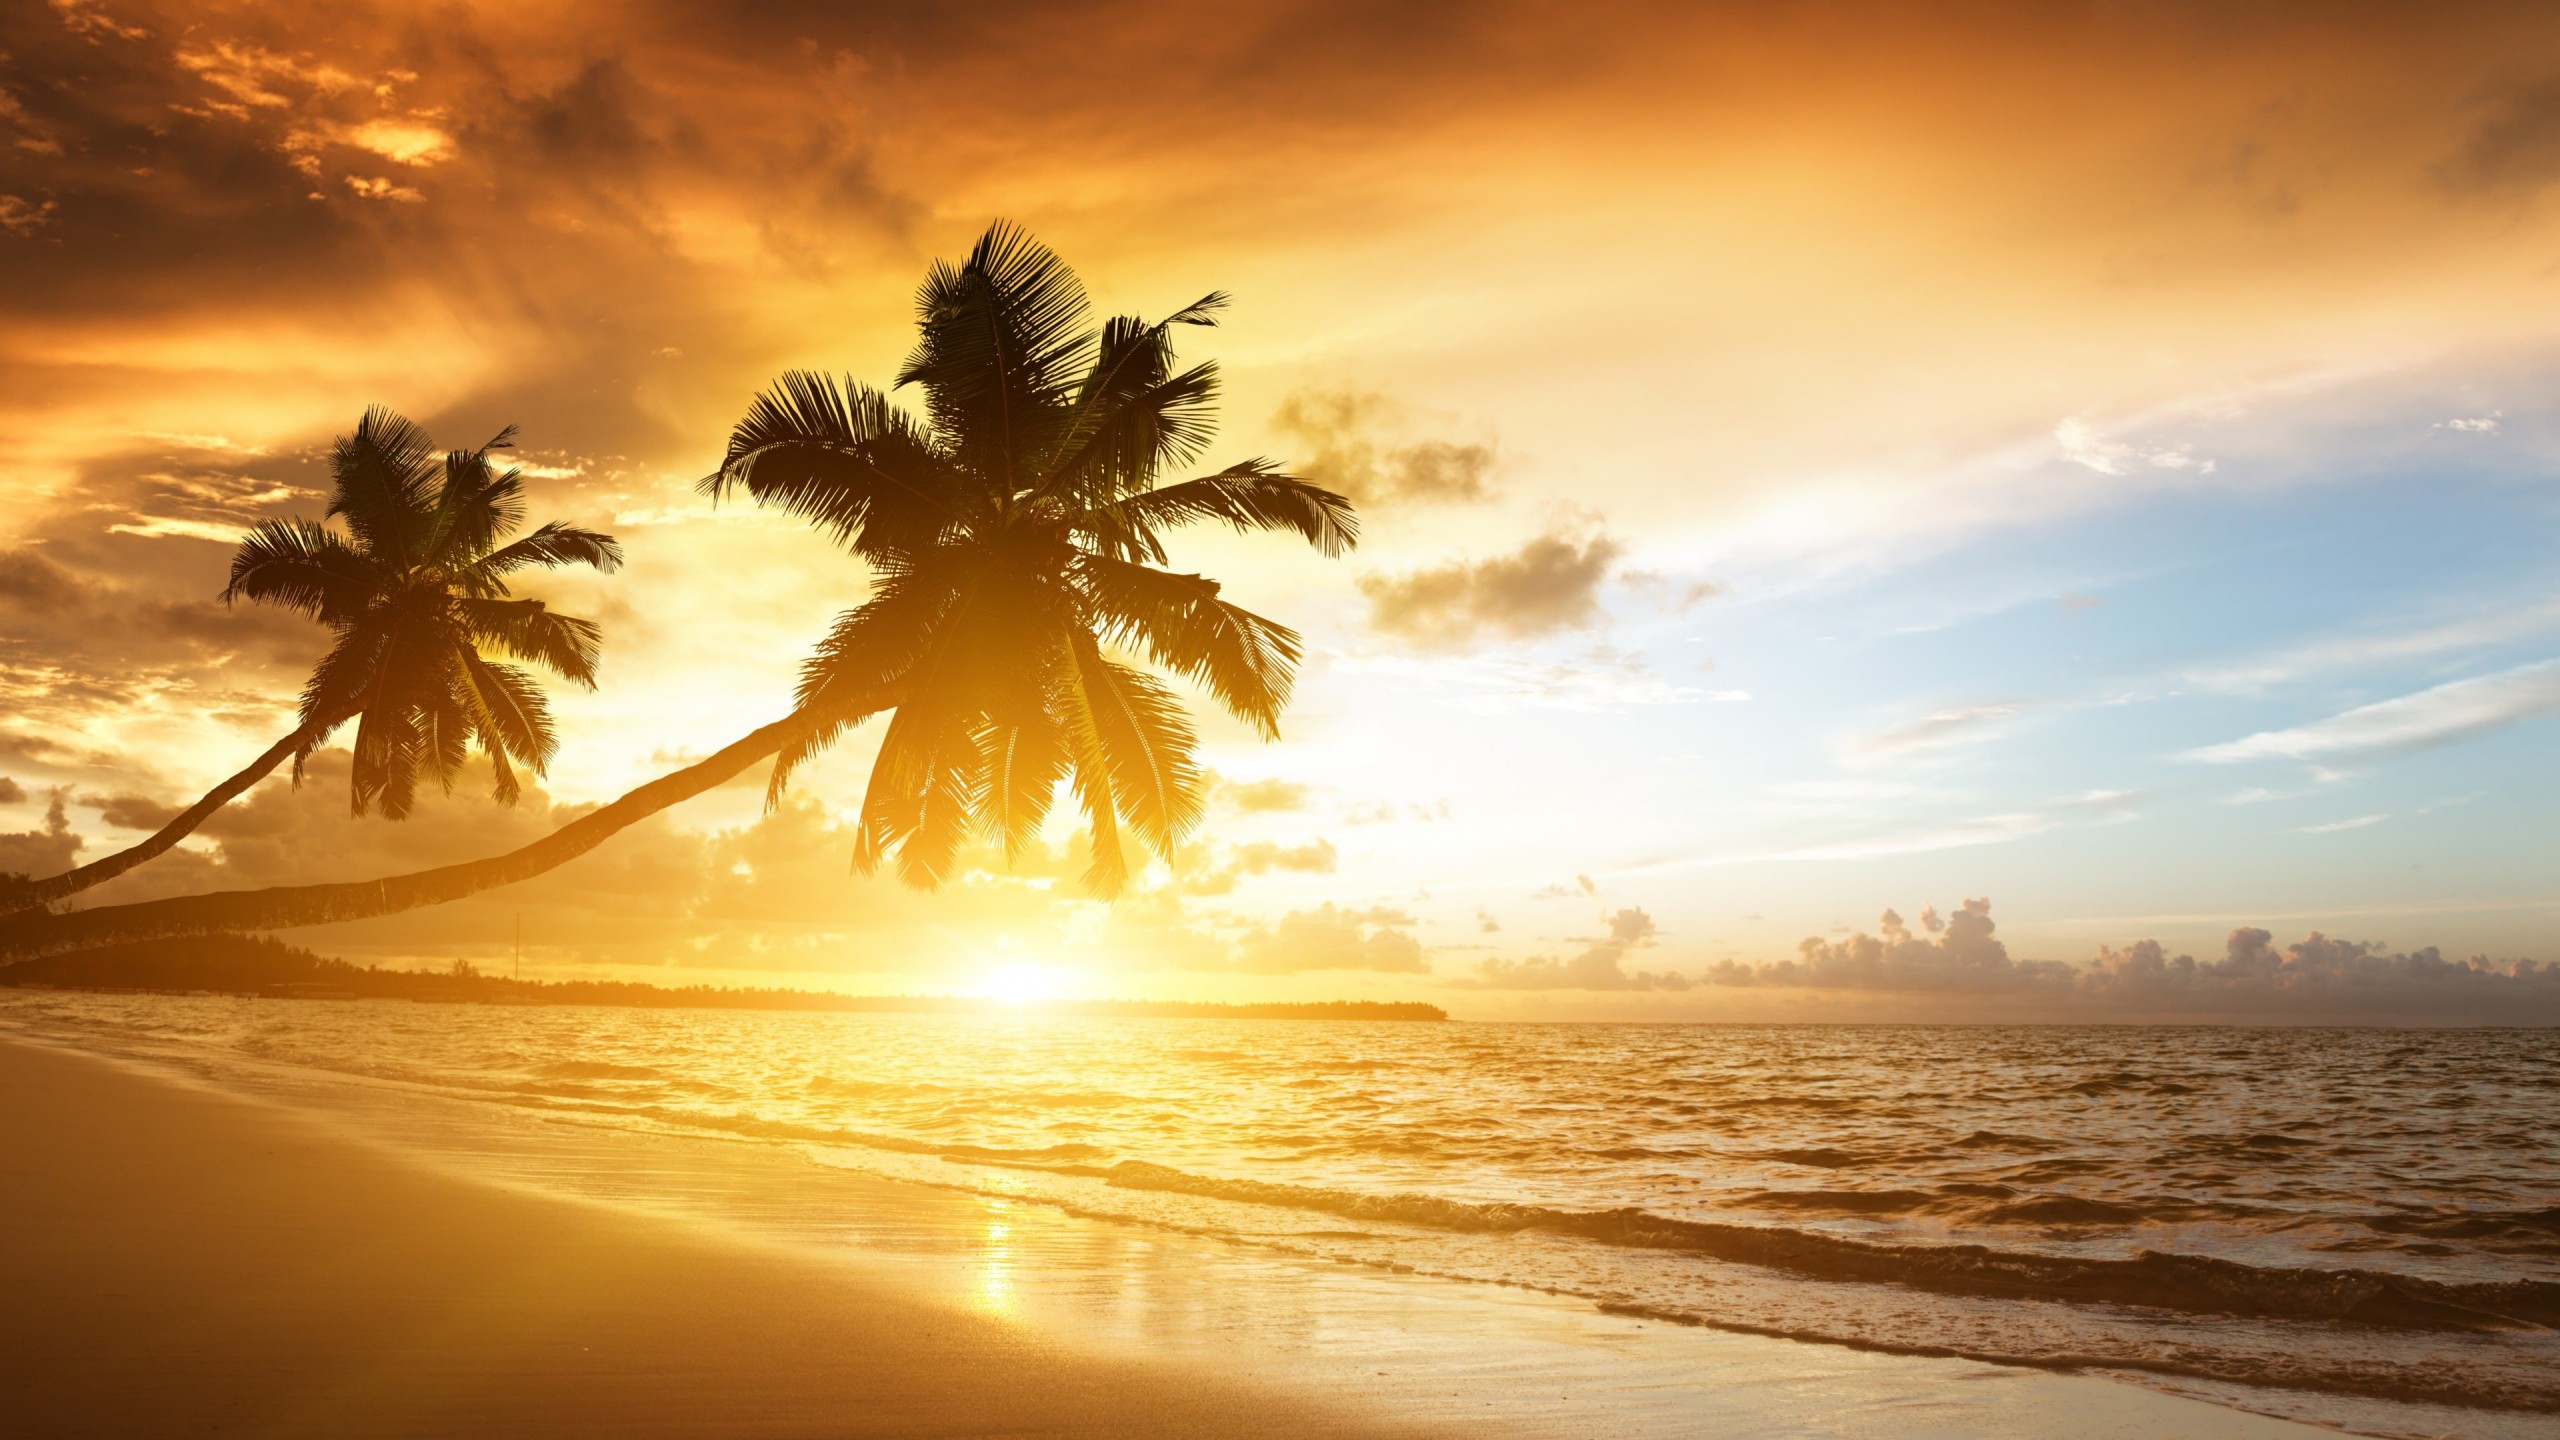 Beach With Palm Trees At Sunset Wallpaper for Social Media YouTube Channel Art